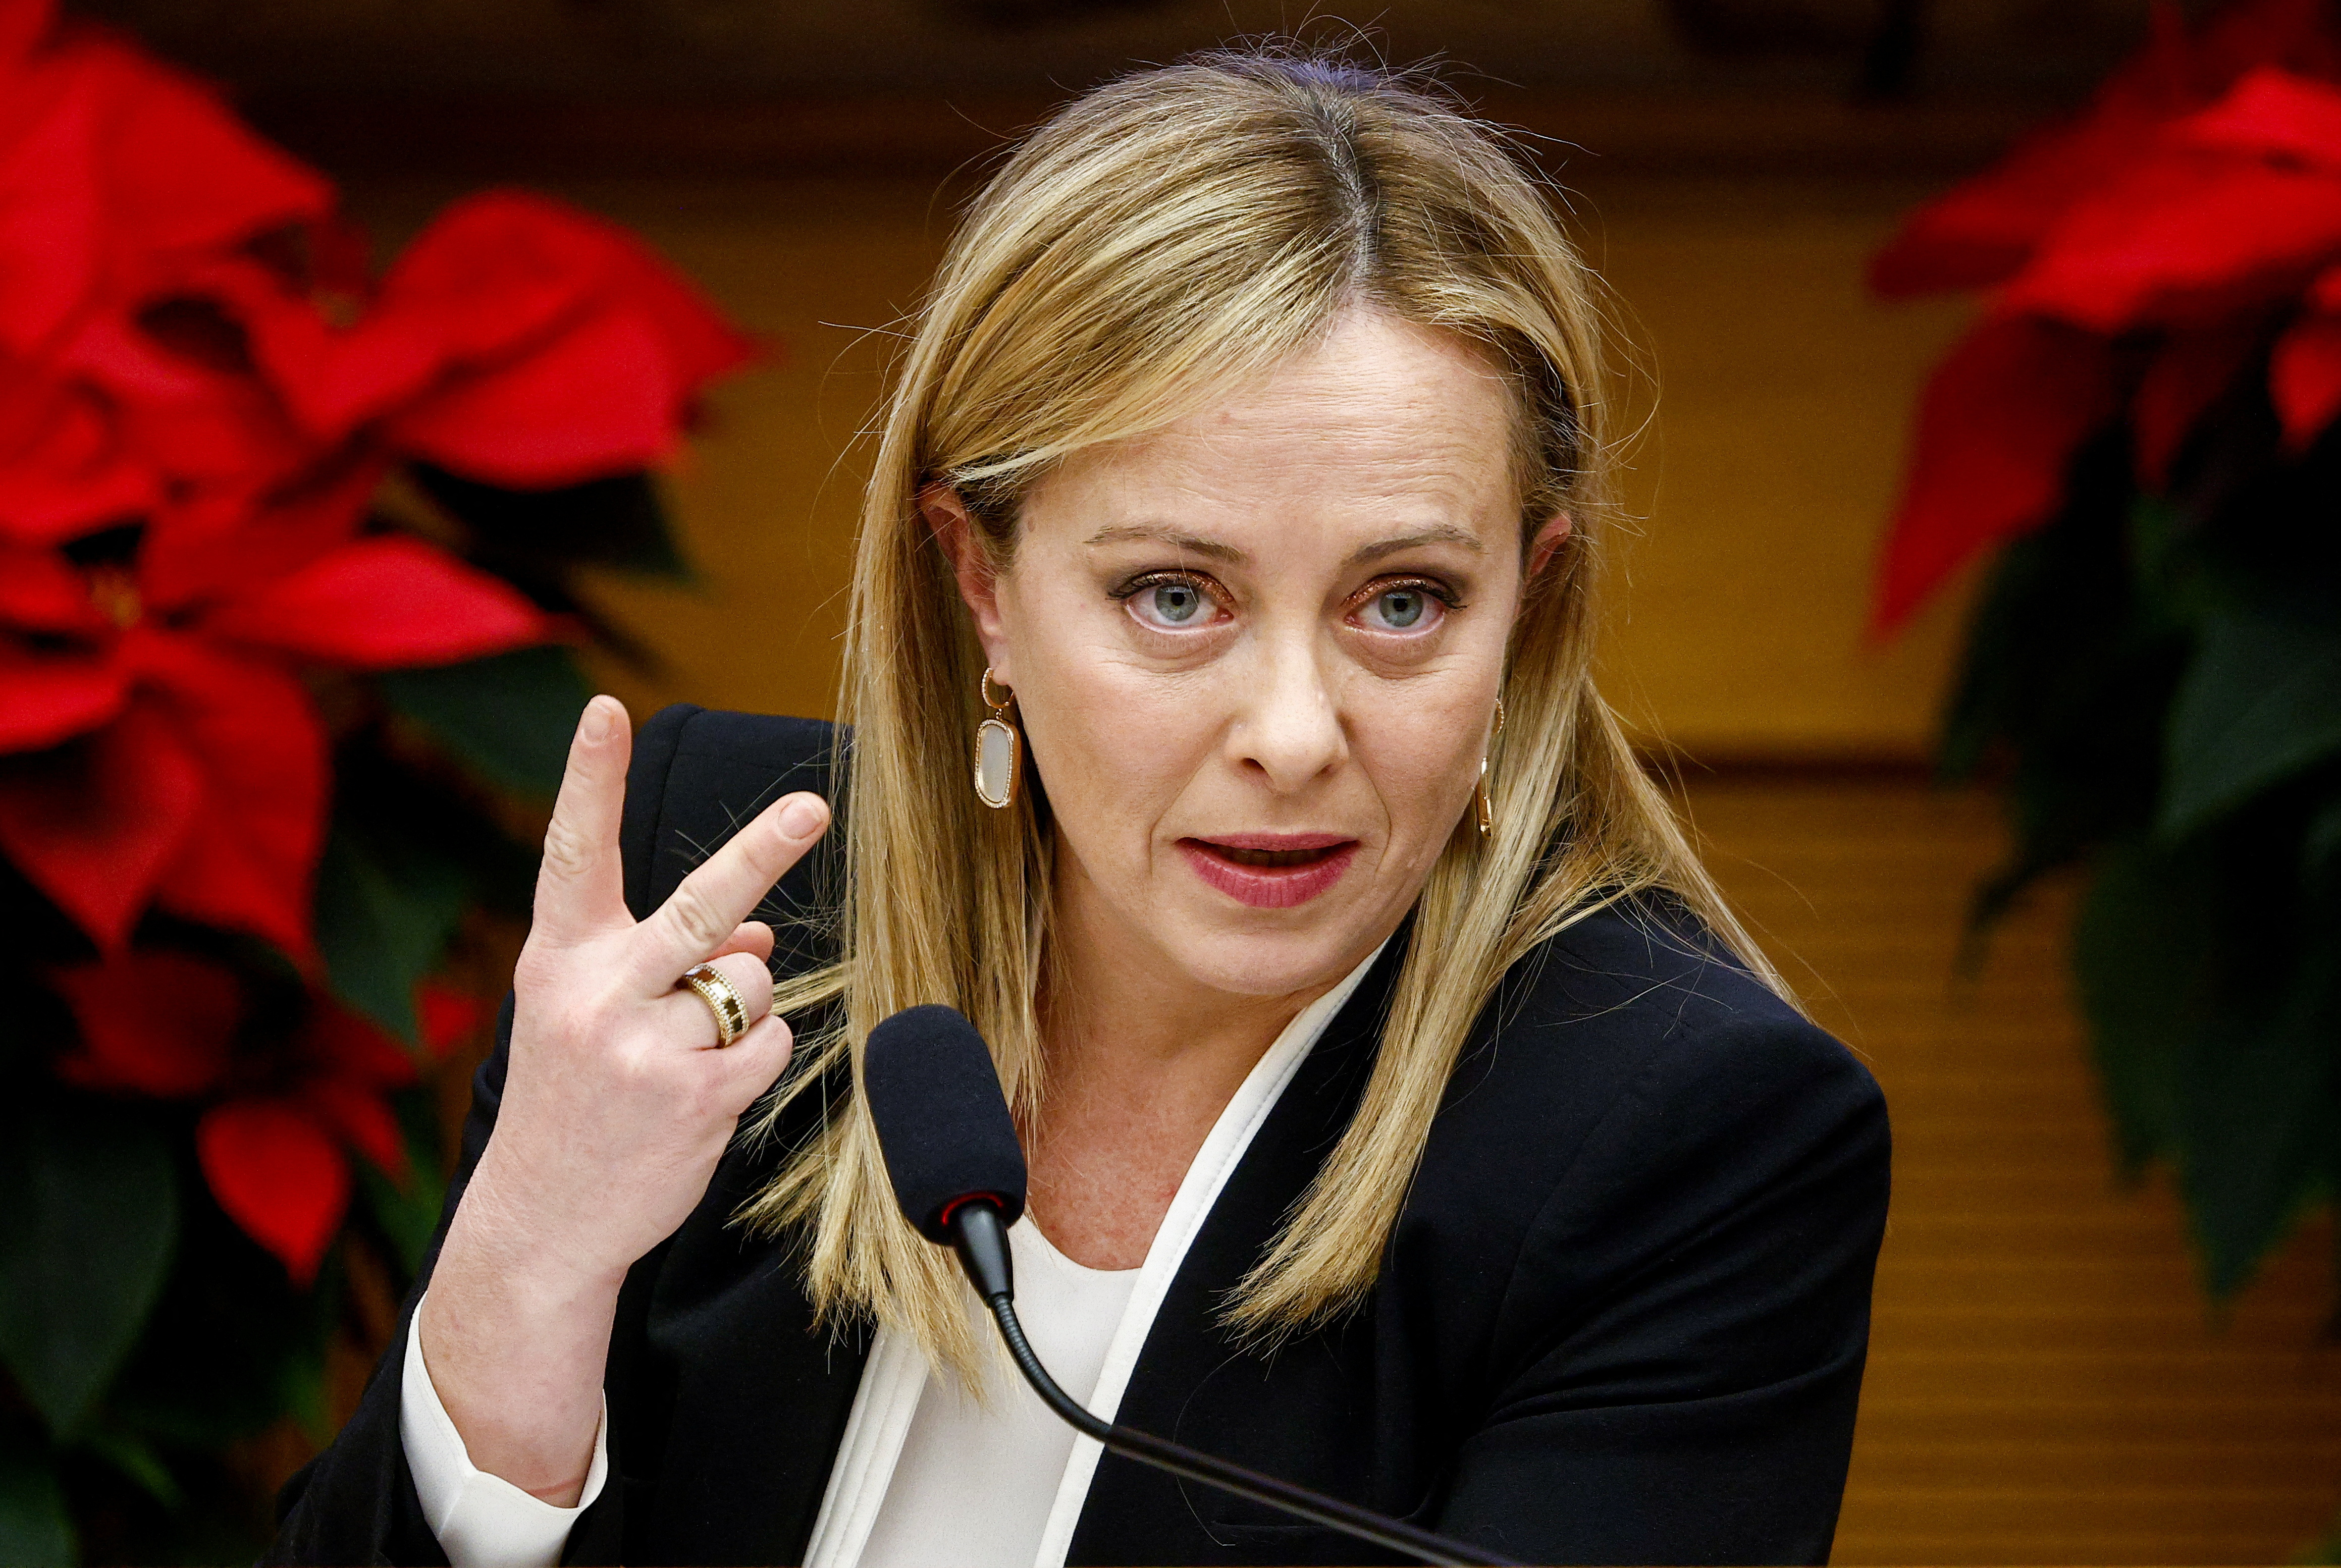 Italy's PM Meloni holds her end-of-year news conference in Rome